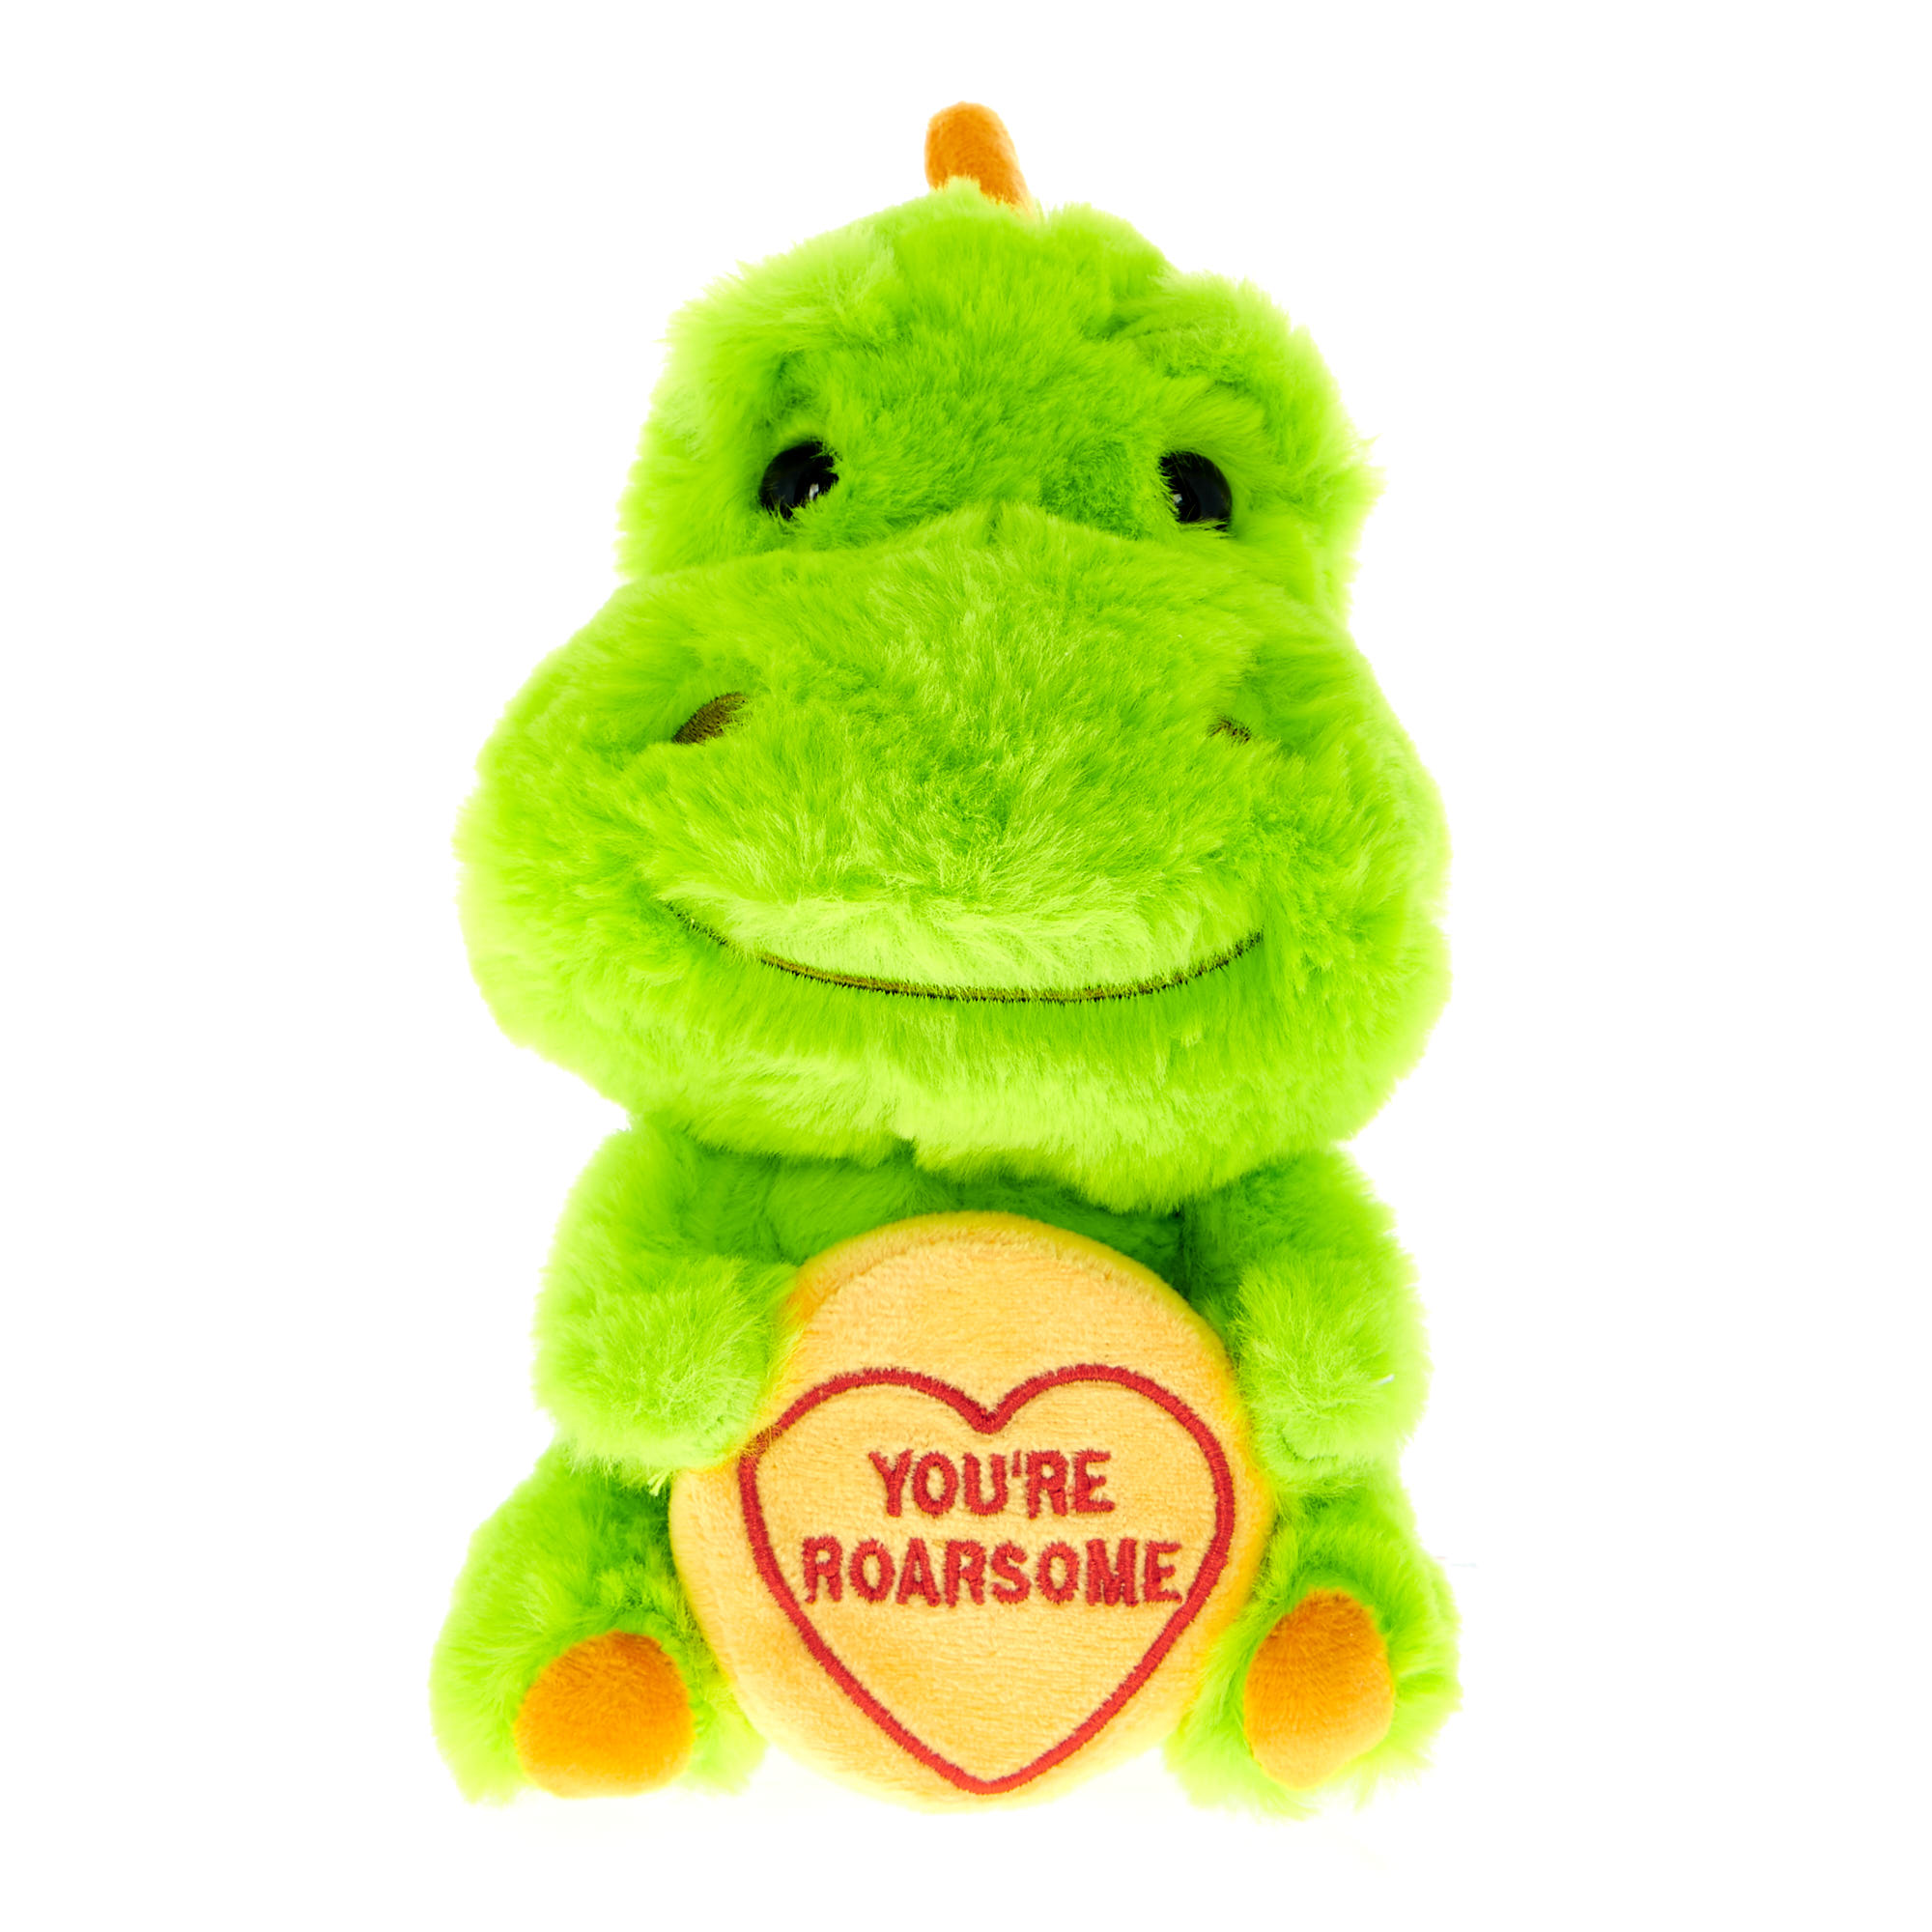 Buy Swizzels Love Hearts Danny Dinosaur Soft Toy For Gbp 699 Card Factory Uk 0045